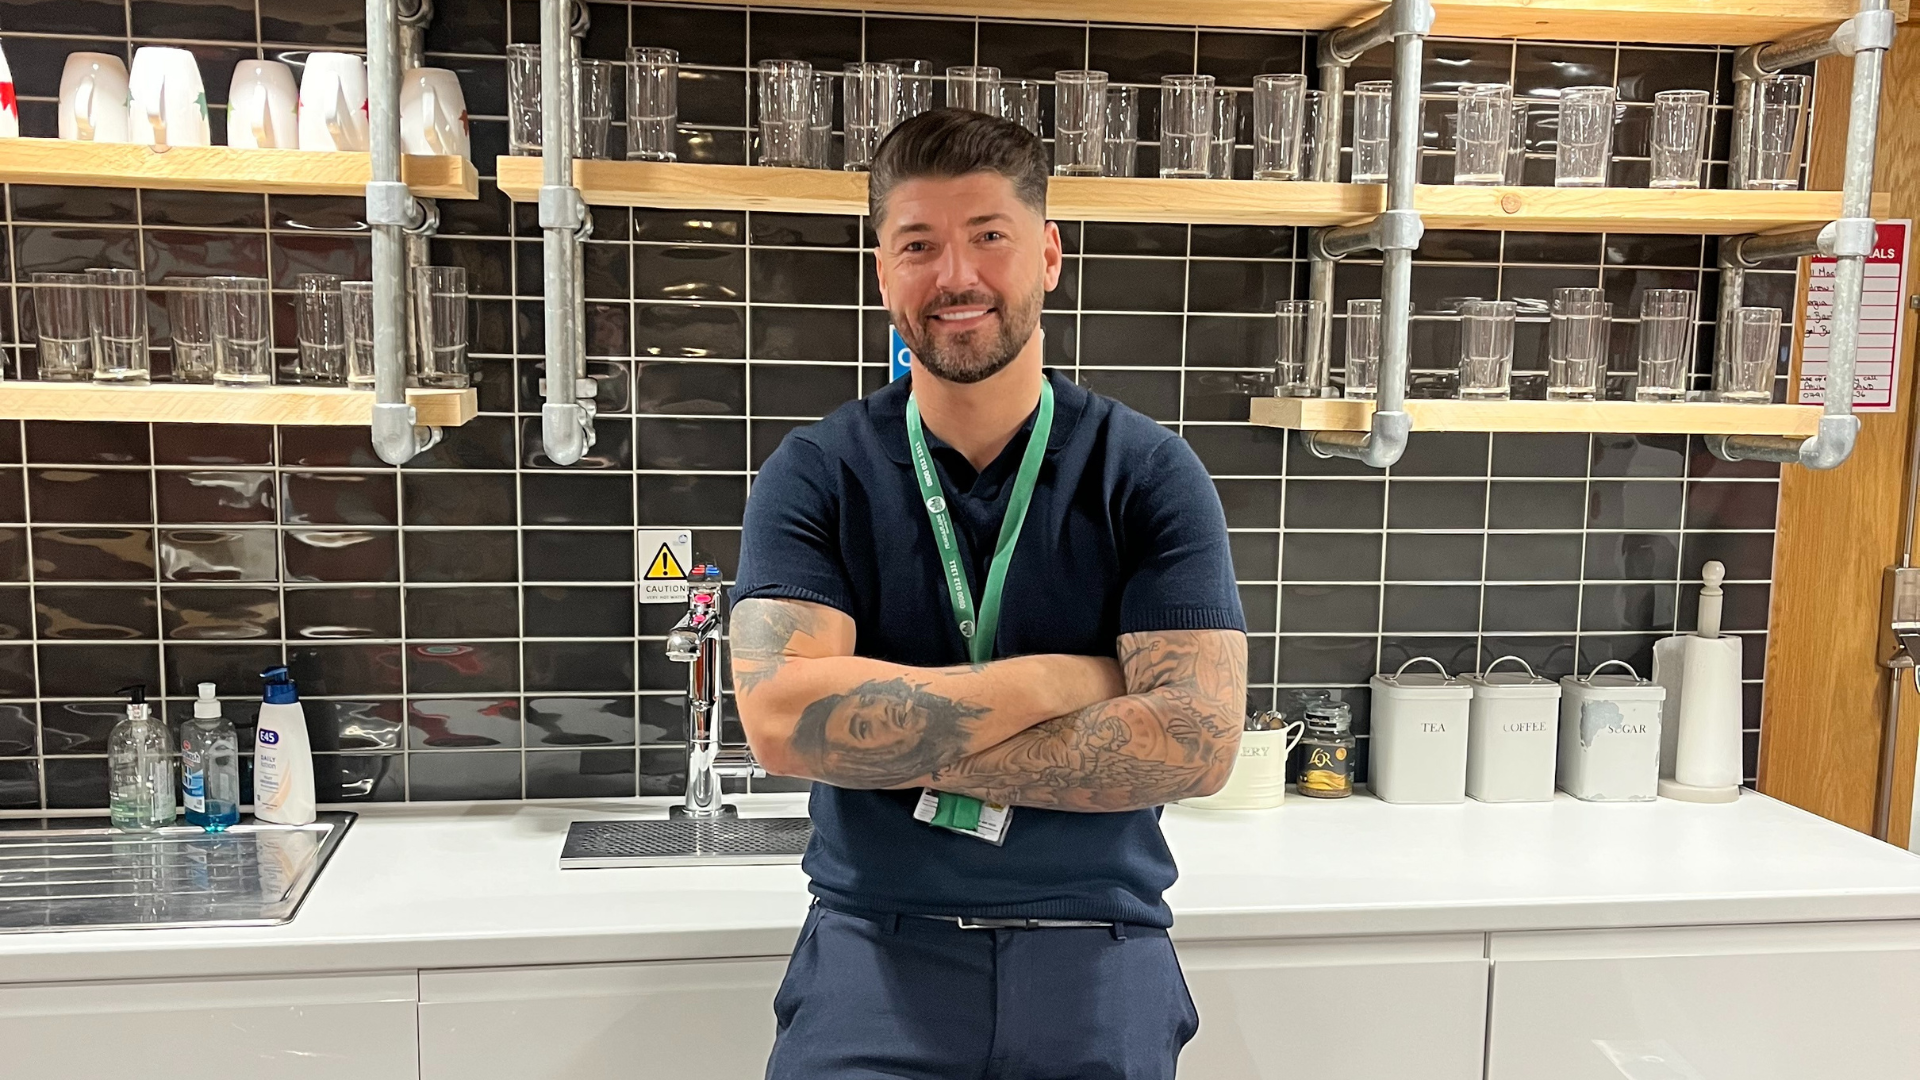 Jamie Cunningham, our Gas Manager, stands in the Trust's office kitchen. He crosses his arms and smiles confidently at the camera.